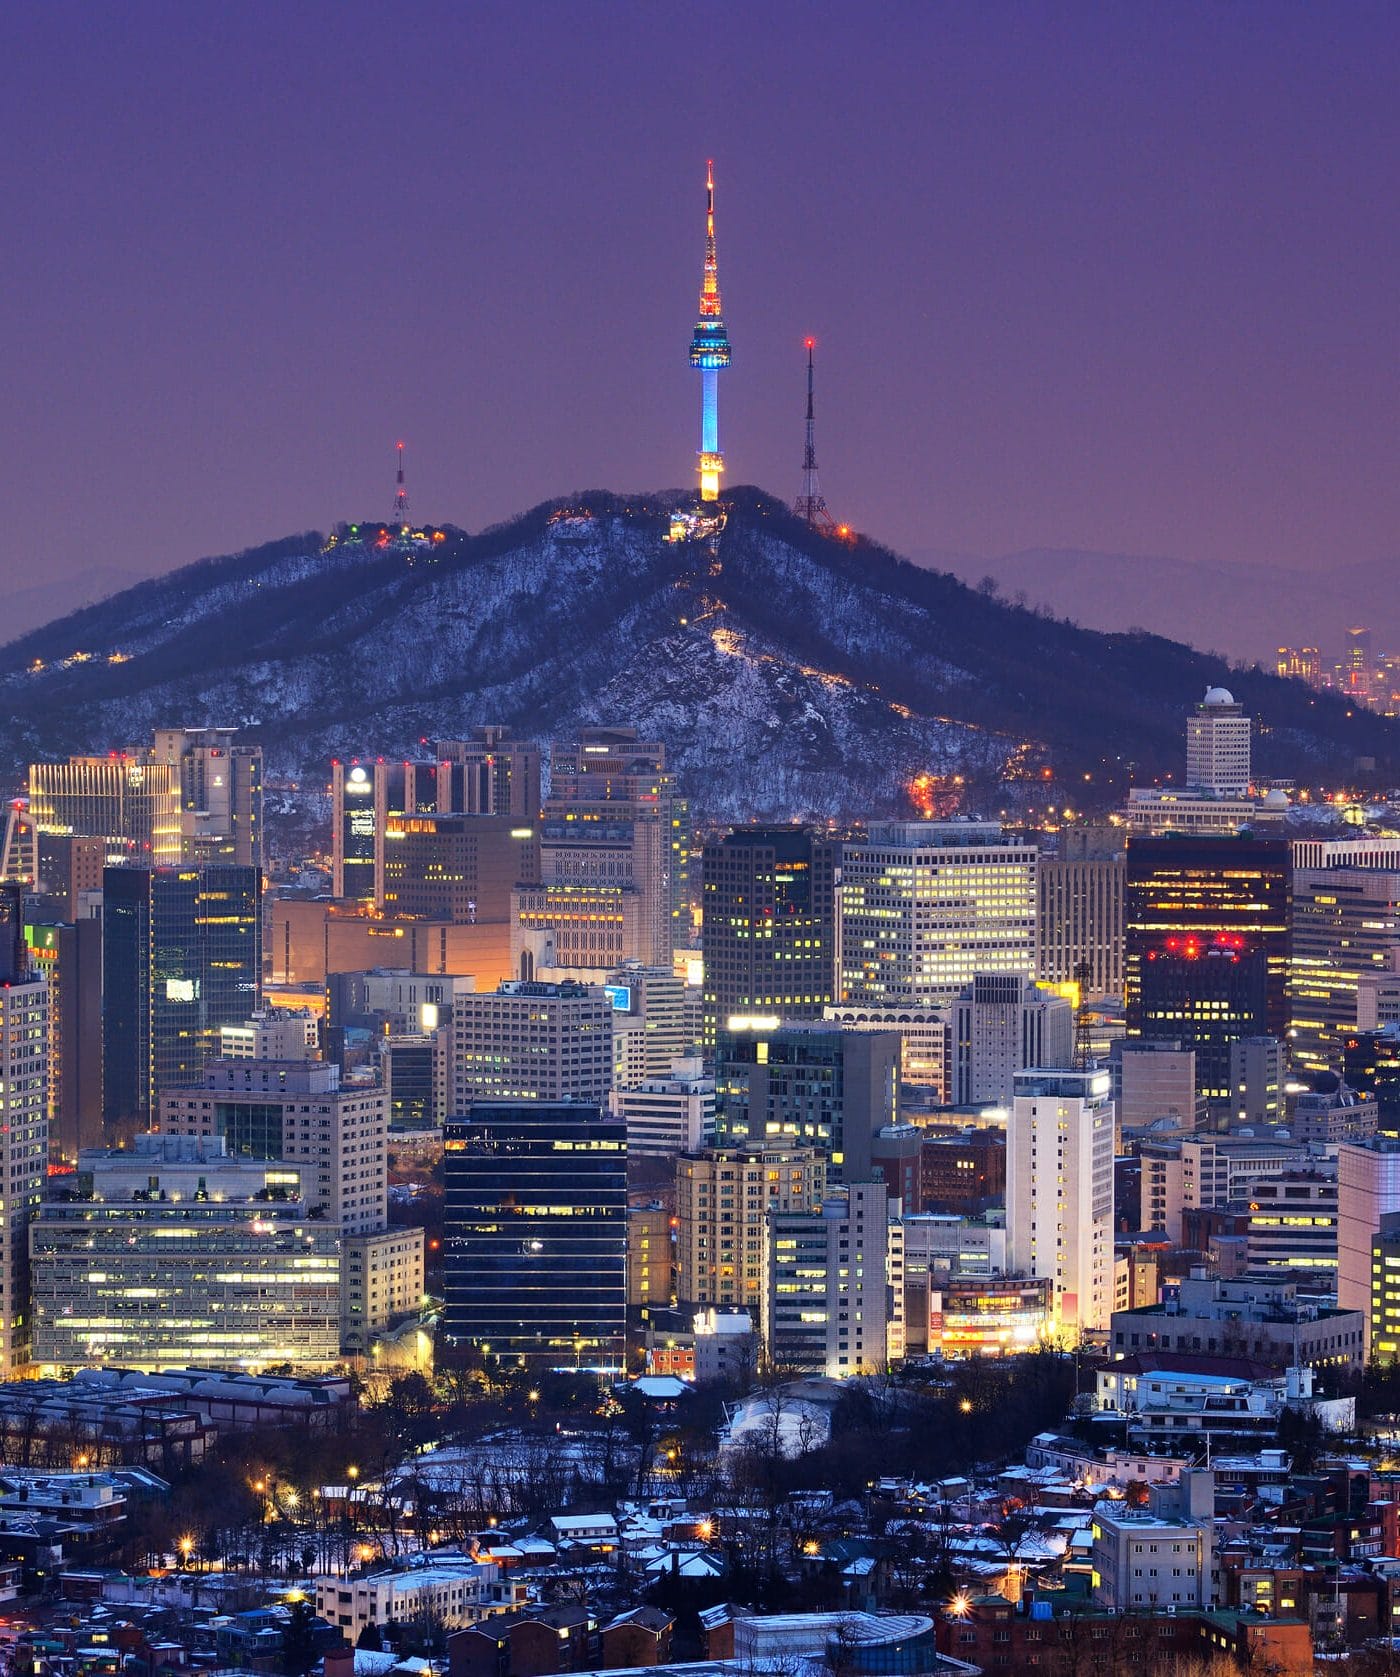 12 Best Korean Tours to Try 12